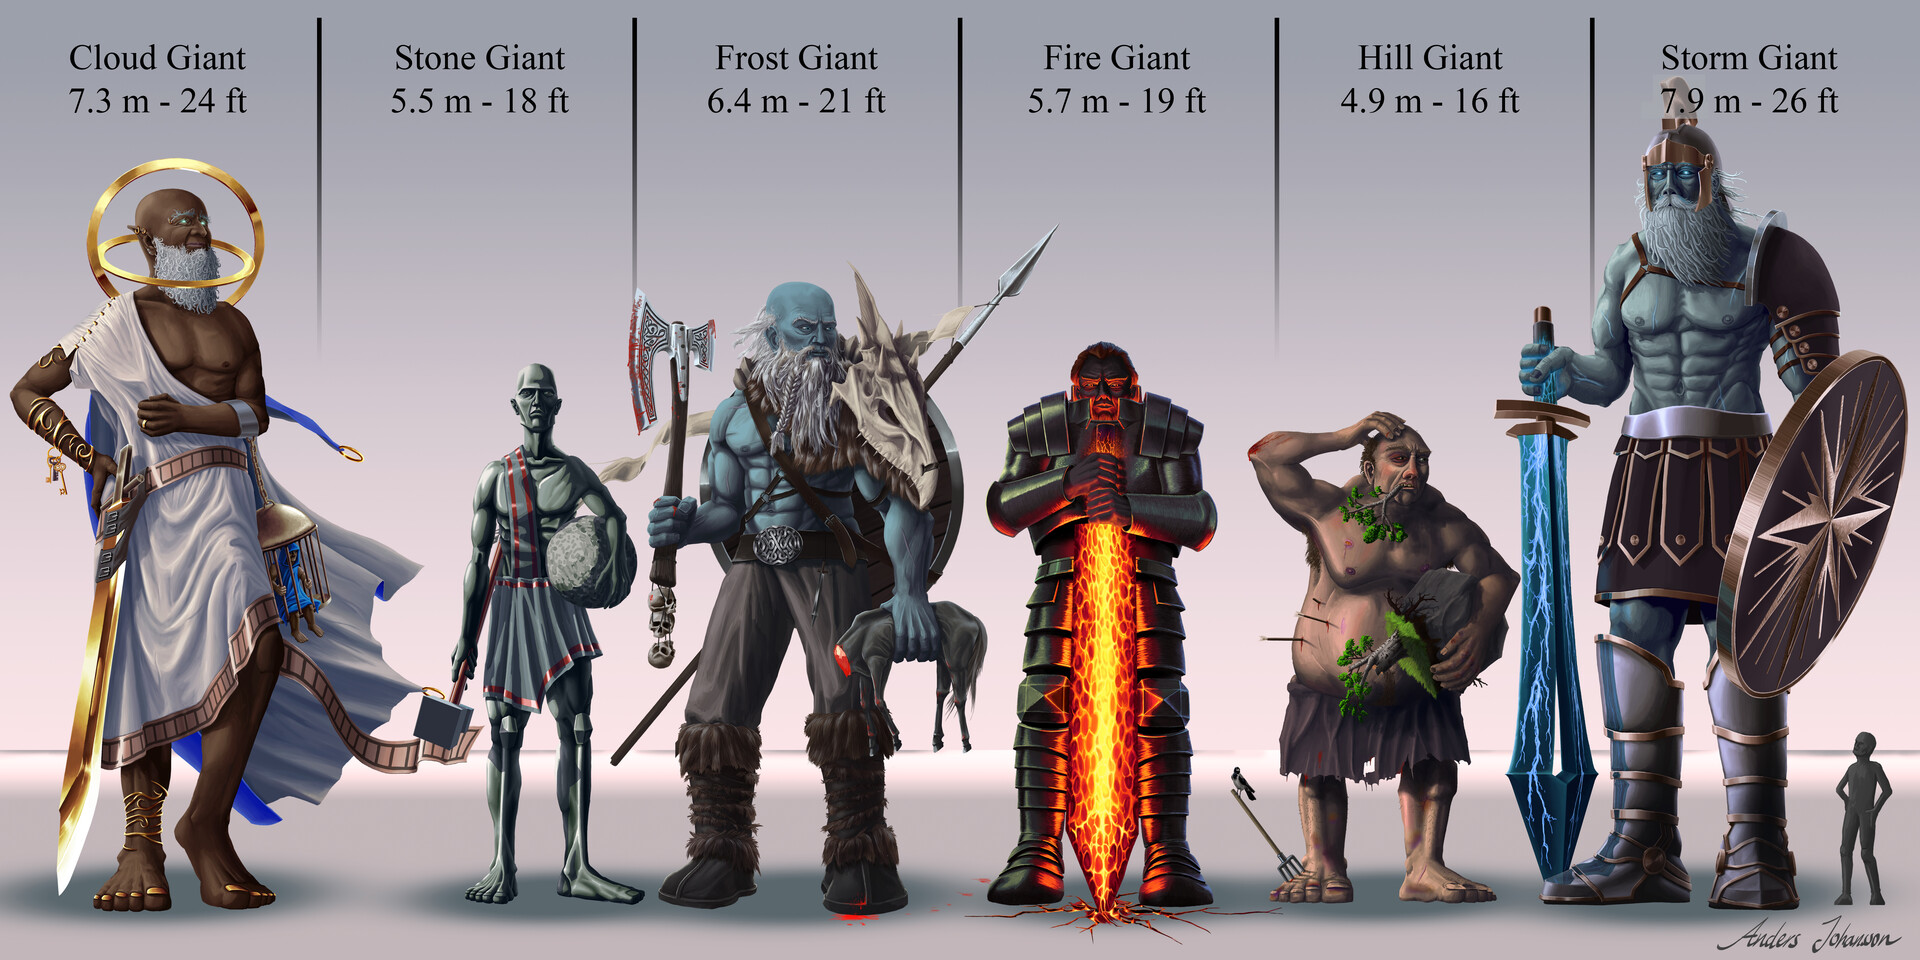 General Comparing Giant Sizes Morrus Unofficial Tabletop Rpg News